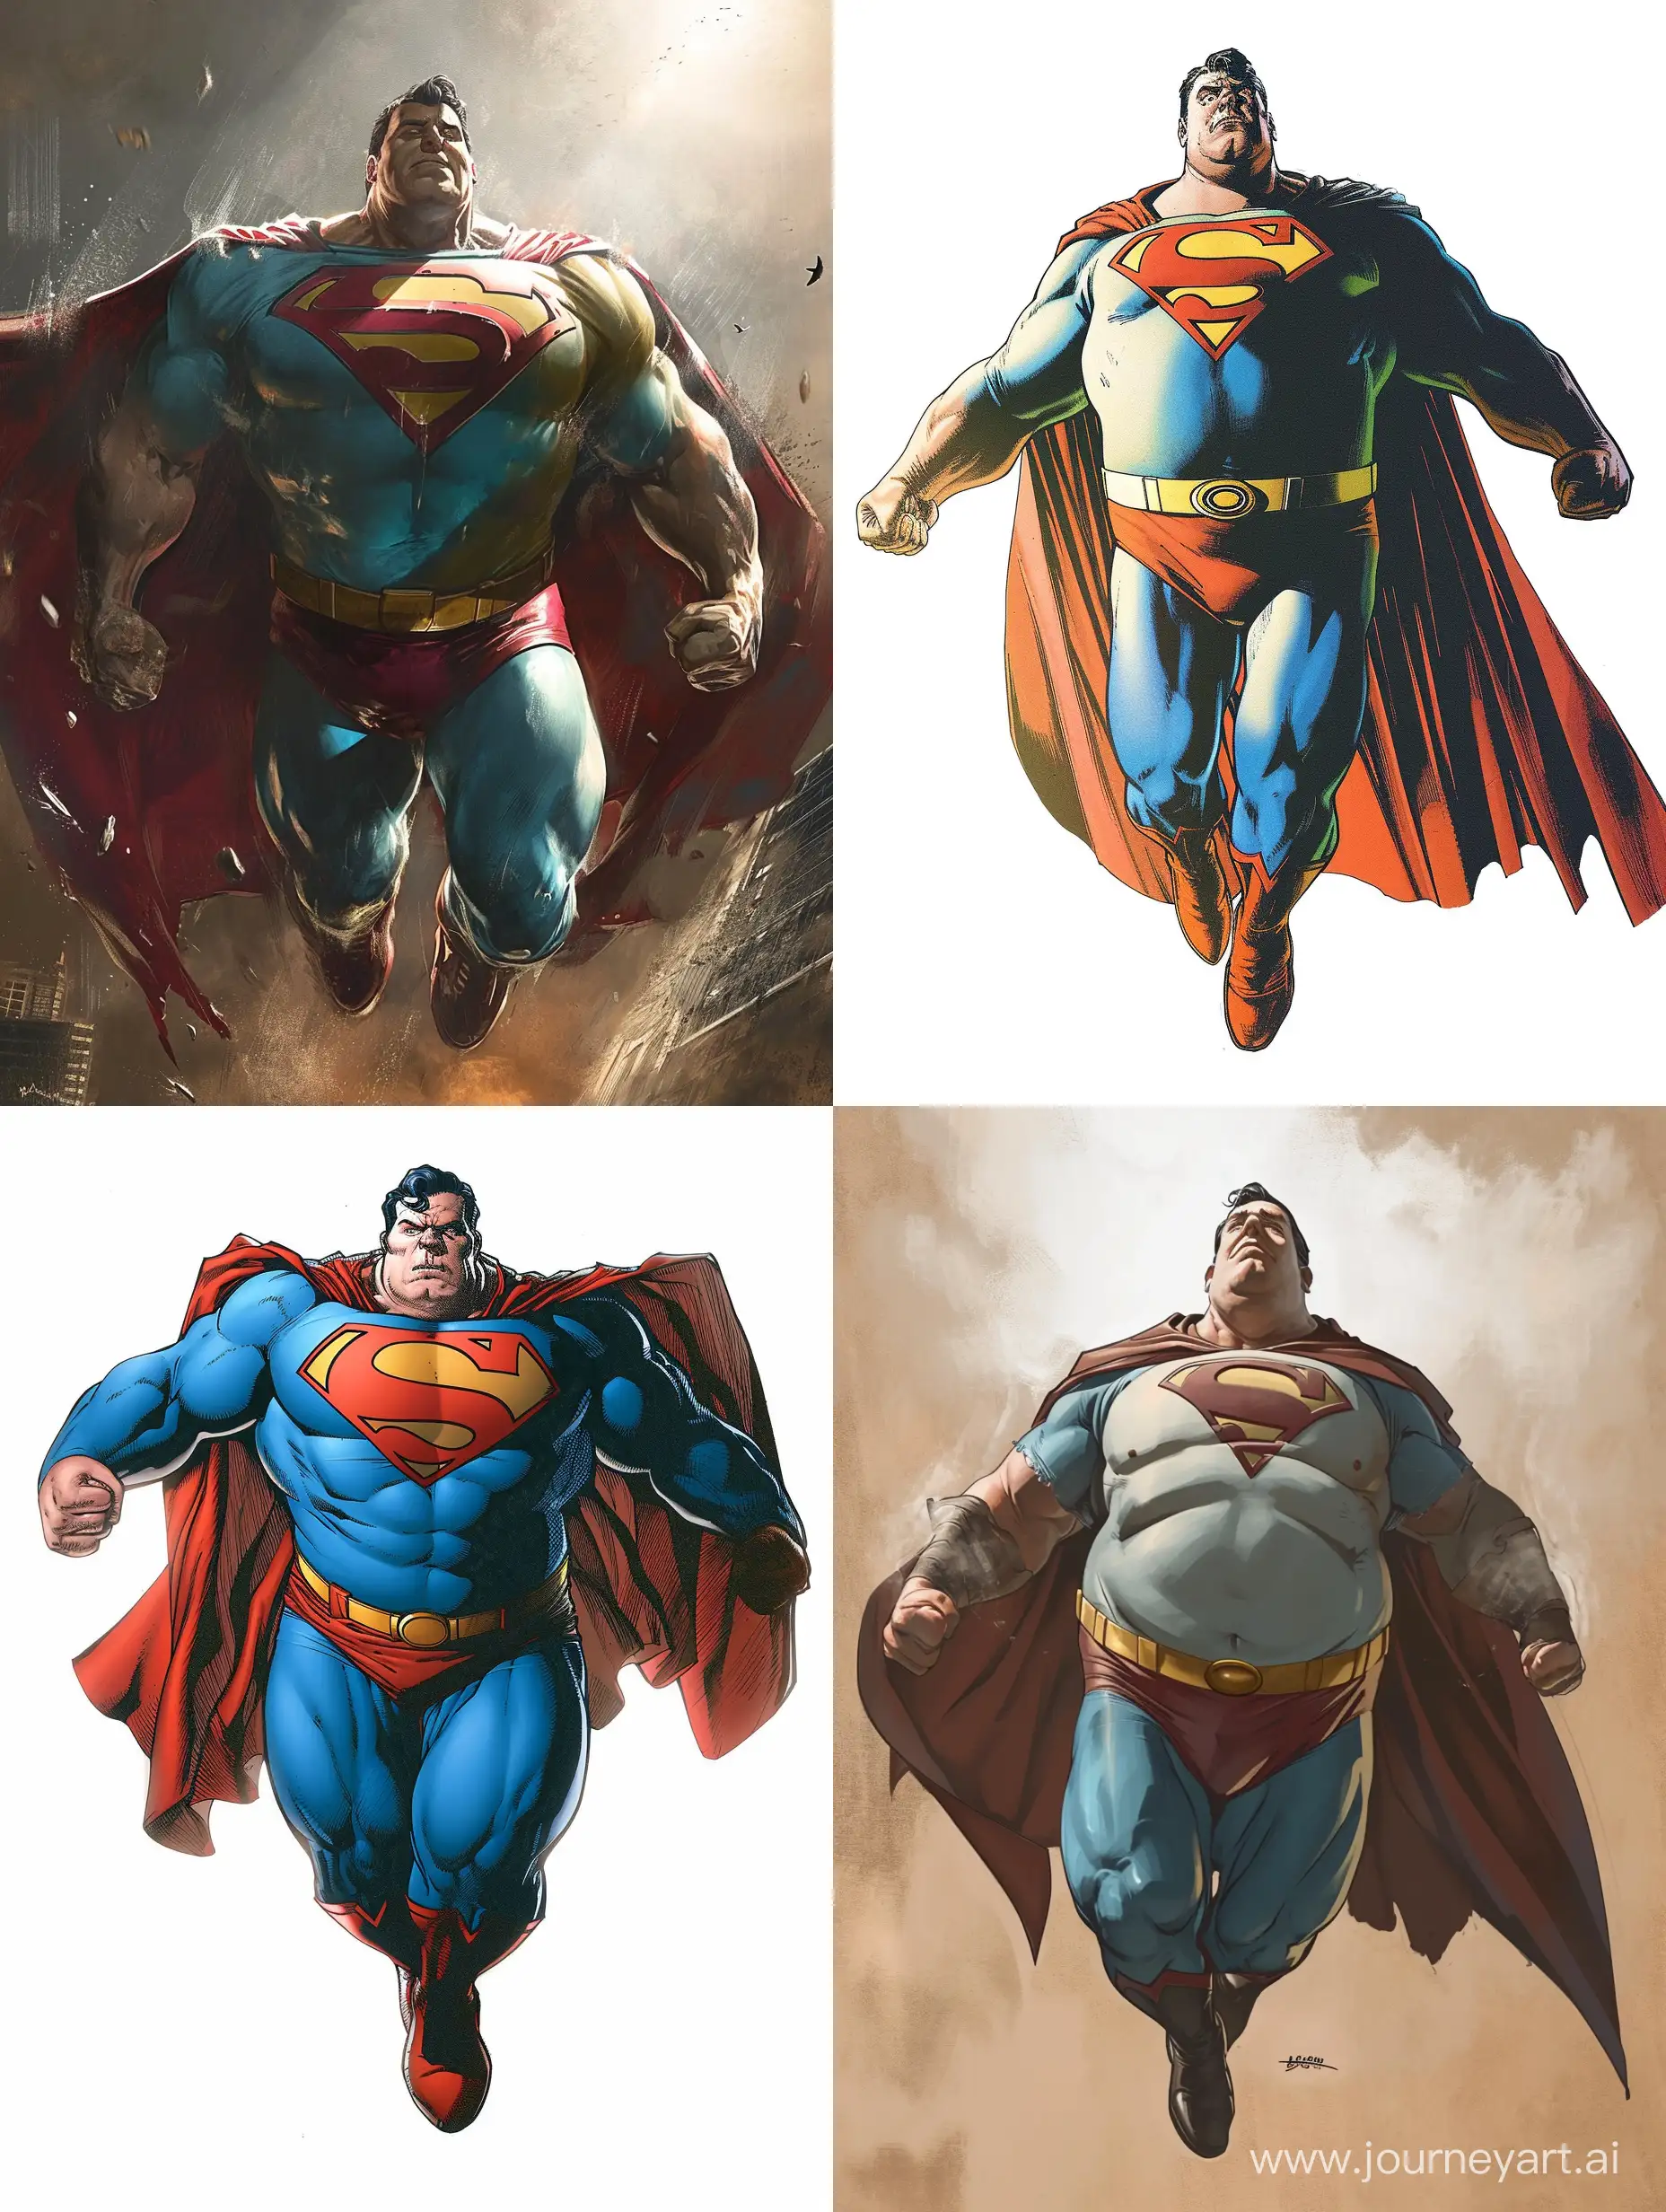 obese SuperMan,overweigh size, he is flying